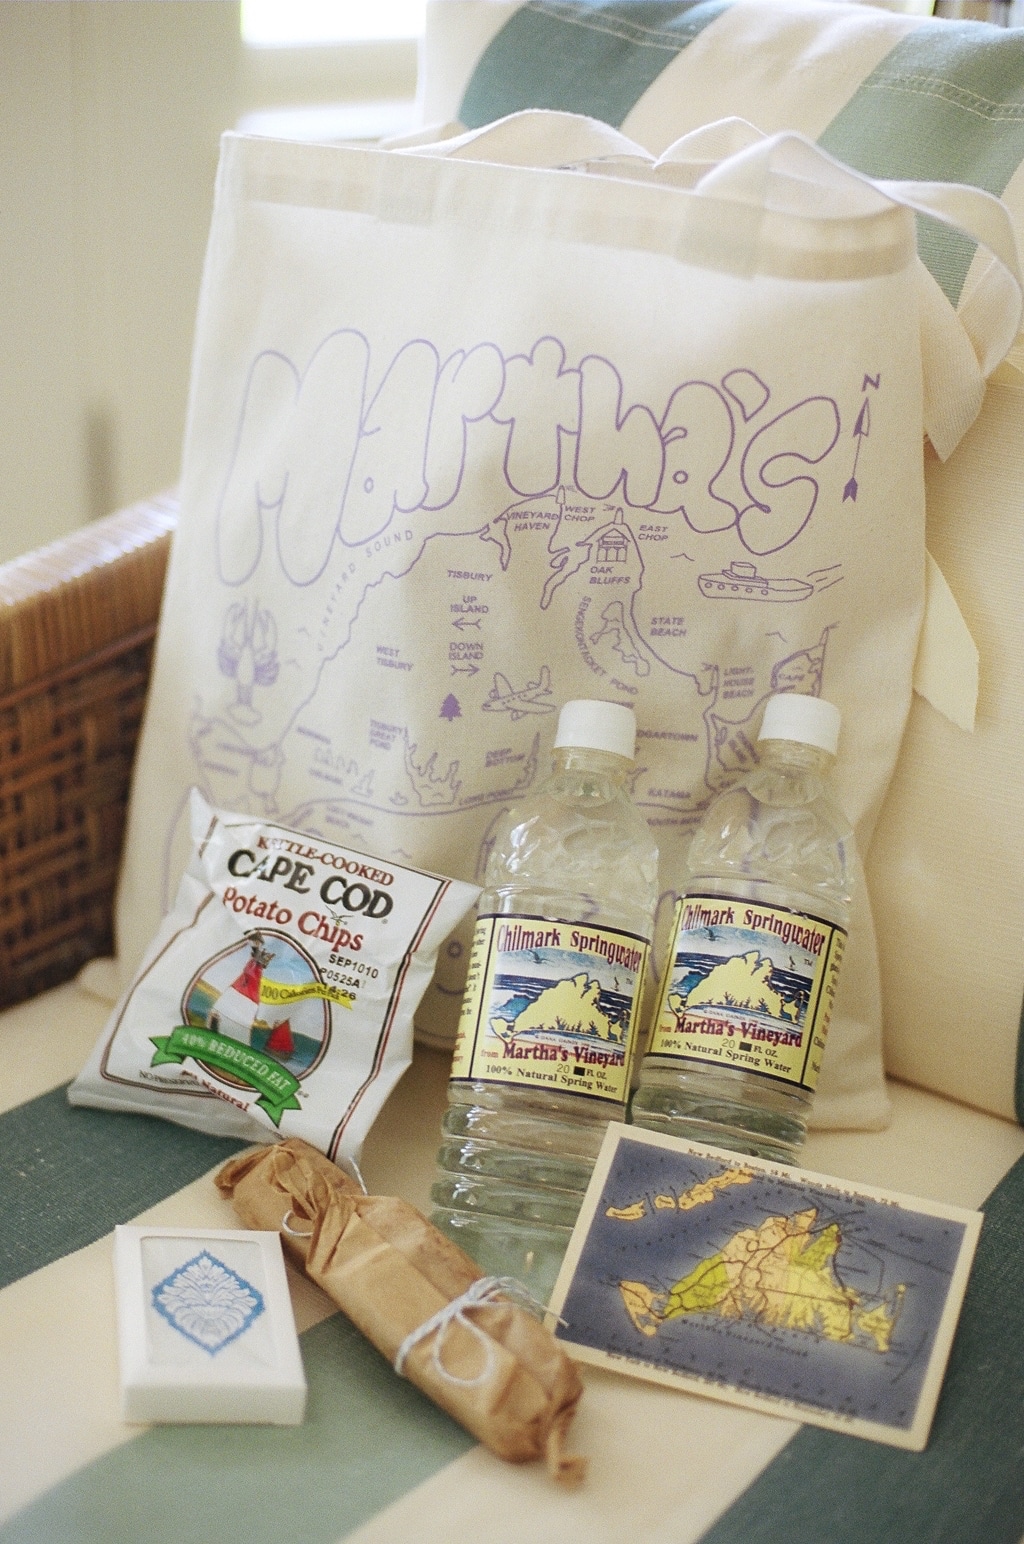 Florida Beach Wedding Welcome Bags - Gifts for Guests